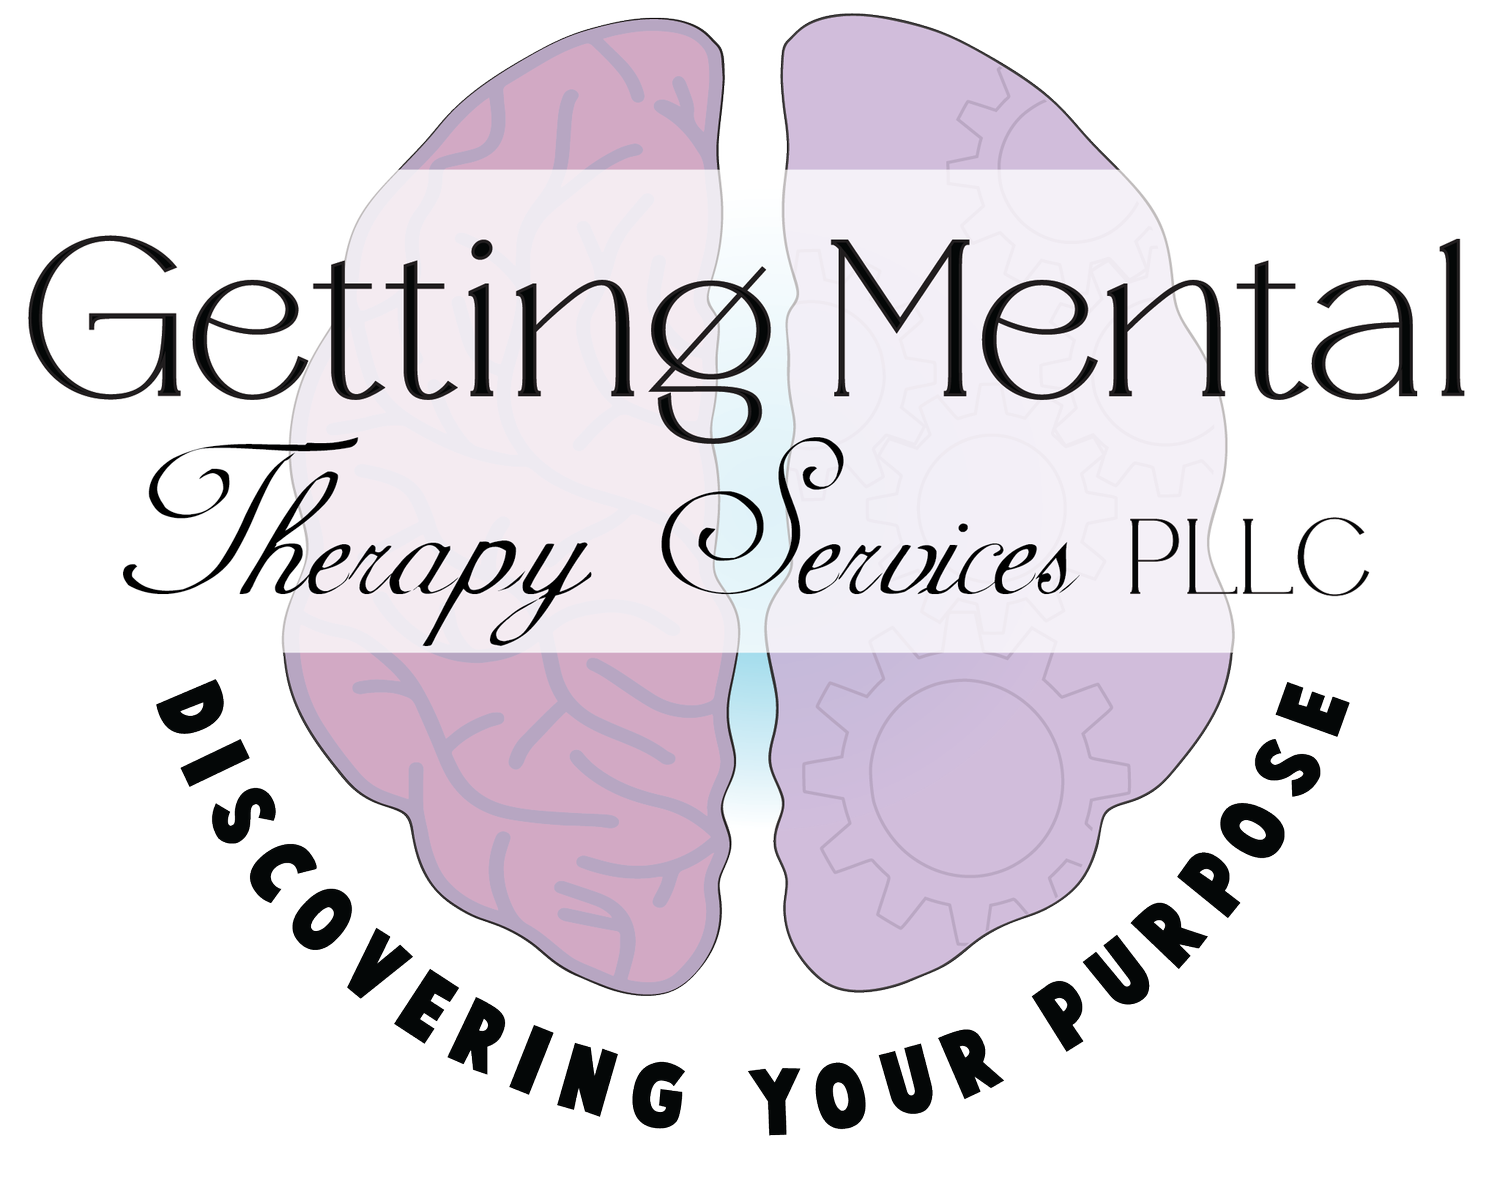 Getting Mental Therapy Services